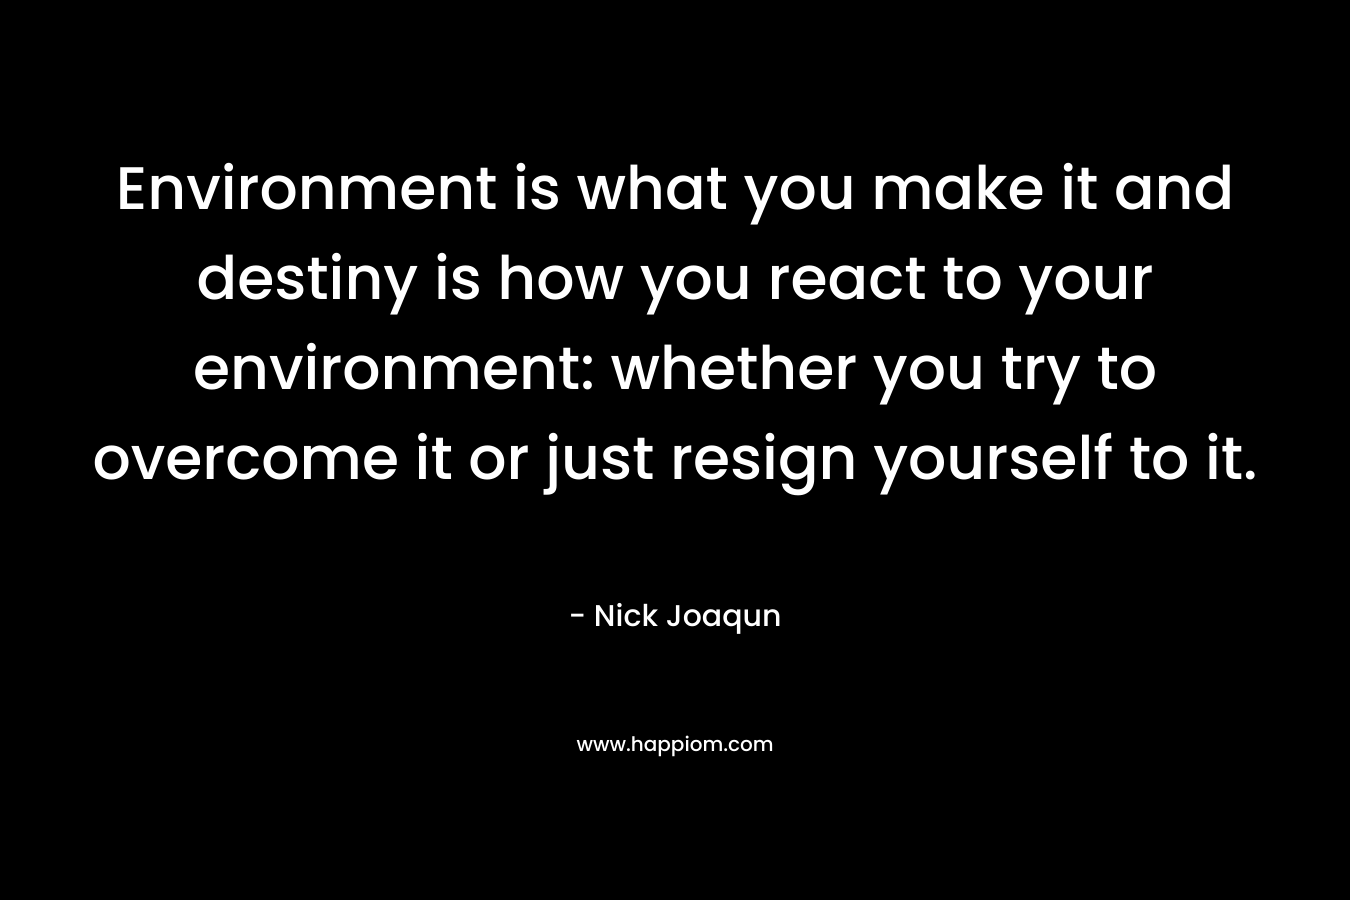 Environment is what you make it and destiny is how you react to your environment: whether you try to overcome it or just resign yourself to it.